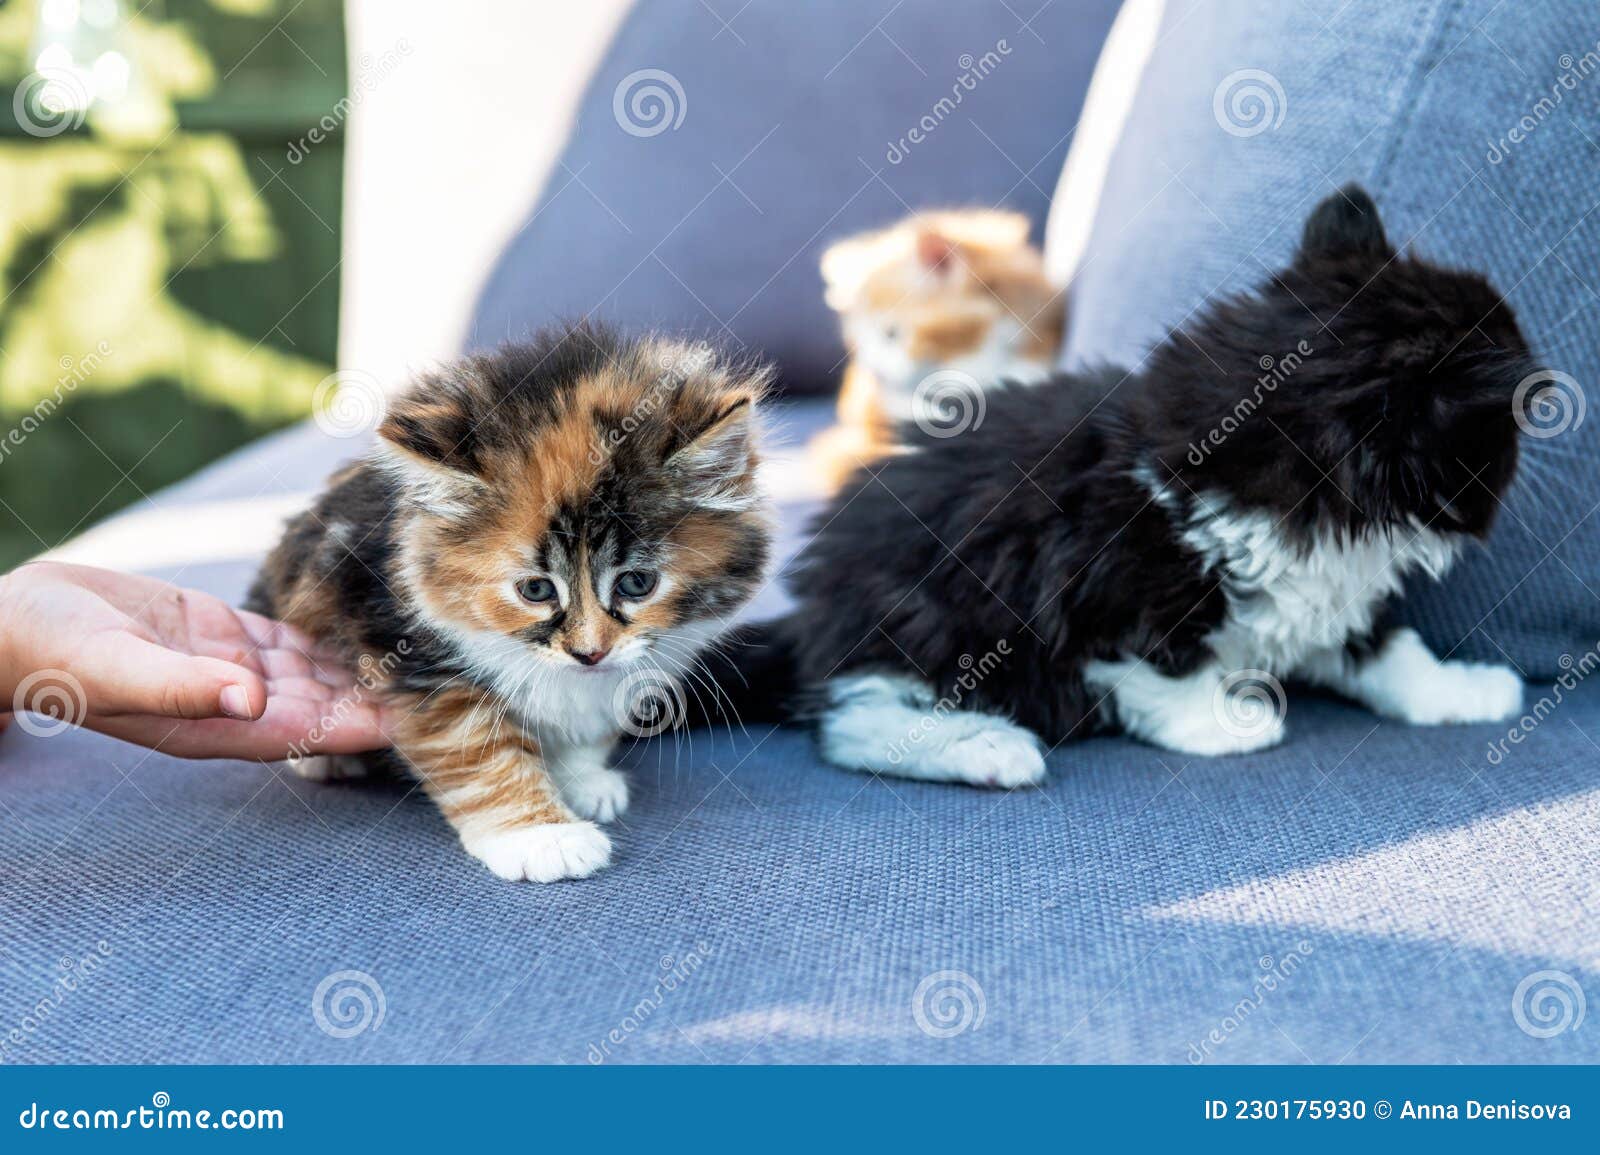 2 cute long haired kittens stock photo. Image of portrait - 230175930